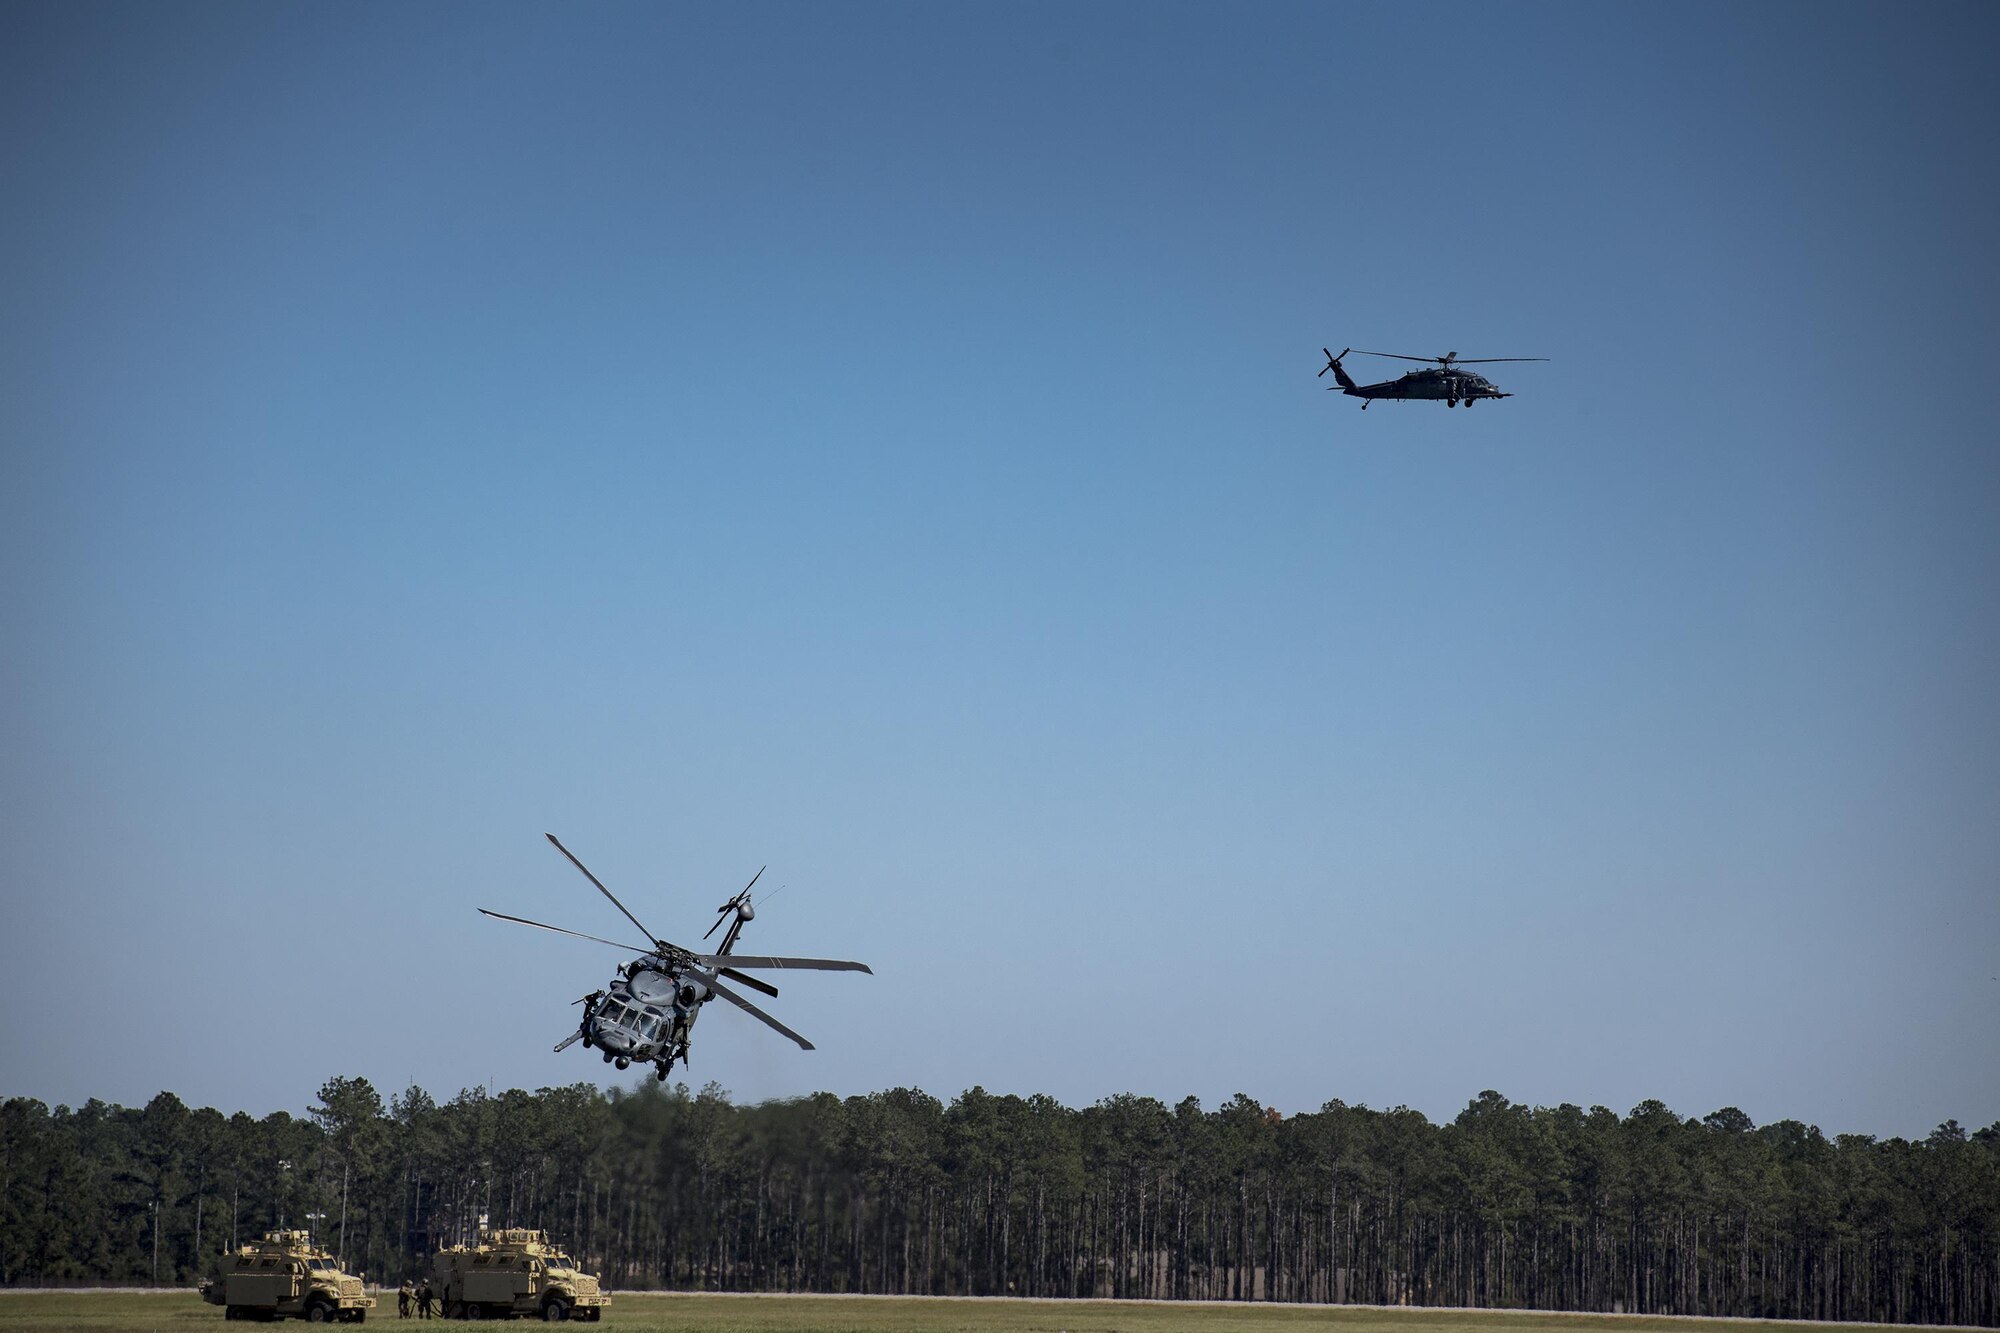 An HH-60G Pave Hawk takes off during a Combat Search and Rescue demonstration during the Thunder Over South Georgia Air Show, Oct. 29, 2017, at Moody Air Force Base, Ga. The open house is an opportunity for Moody to thank the local community for all its support, and exhibit air power and it included aerial performances, food, face painting and much more. (U.S. Air Force photo by Staff Sgt. Ryan Callaghan)